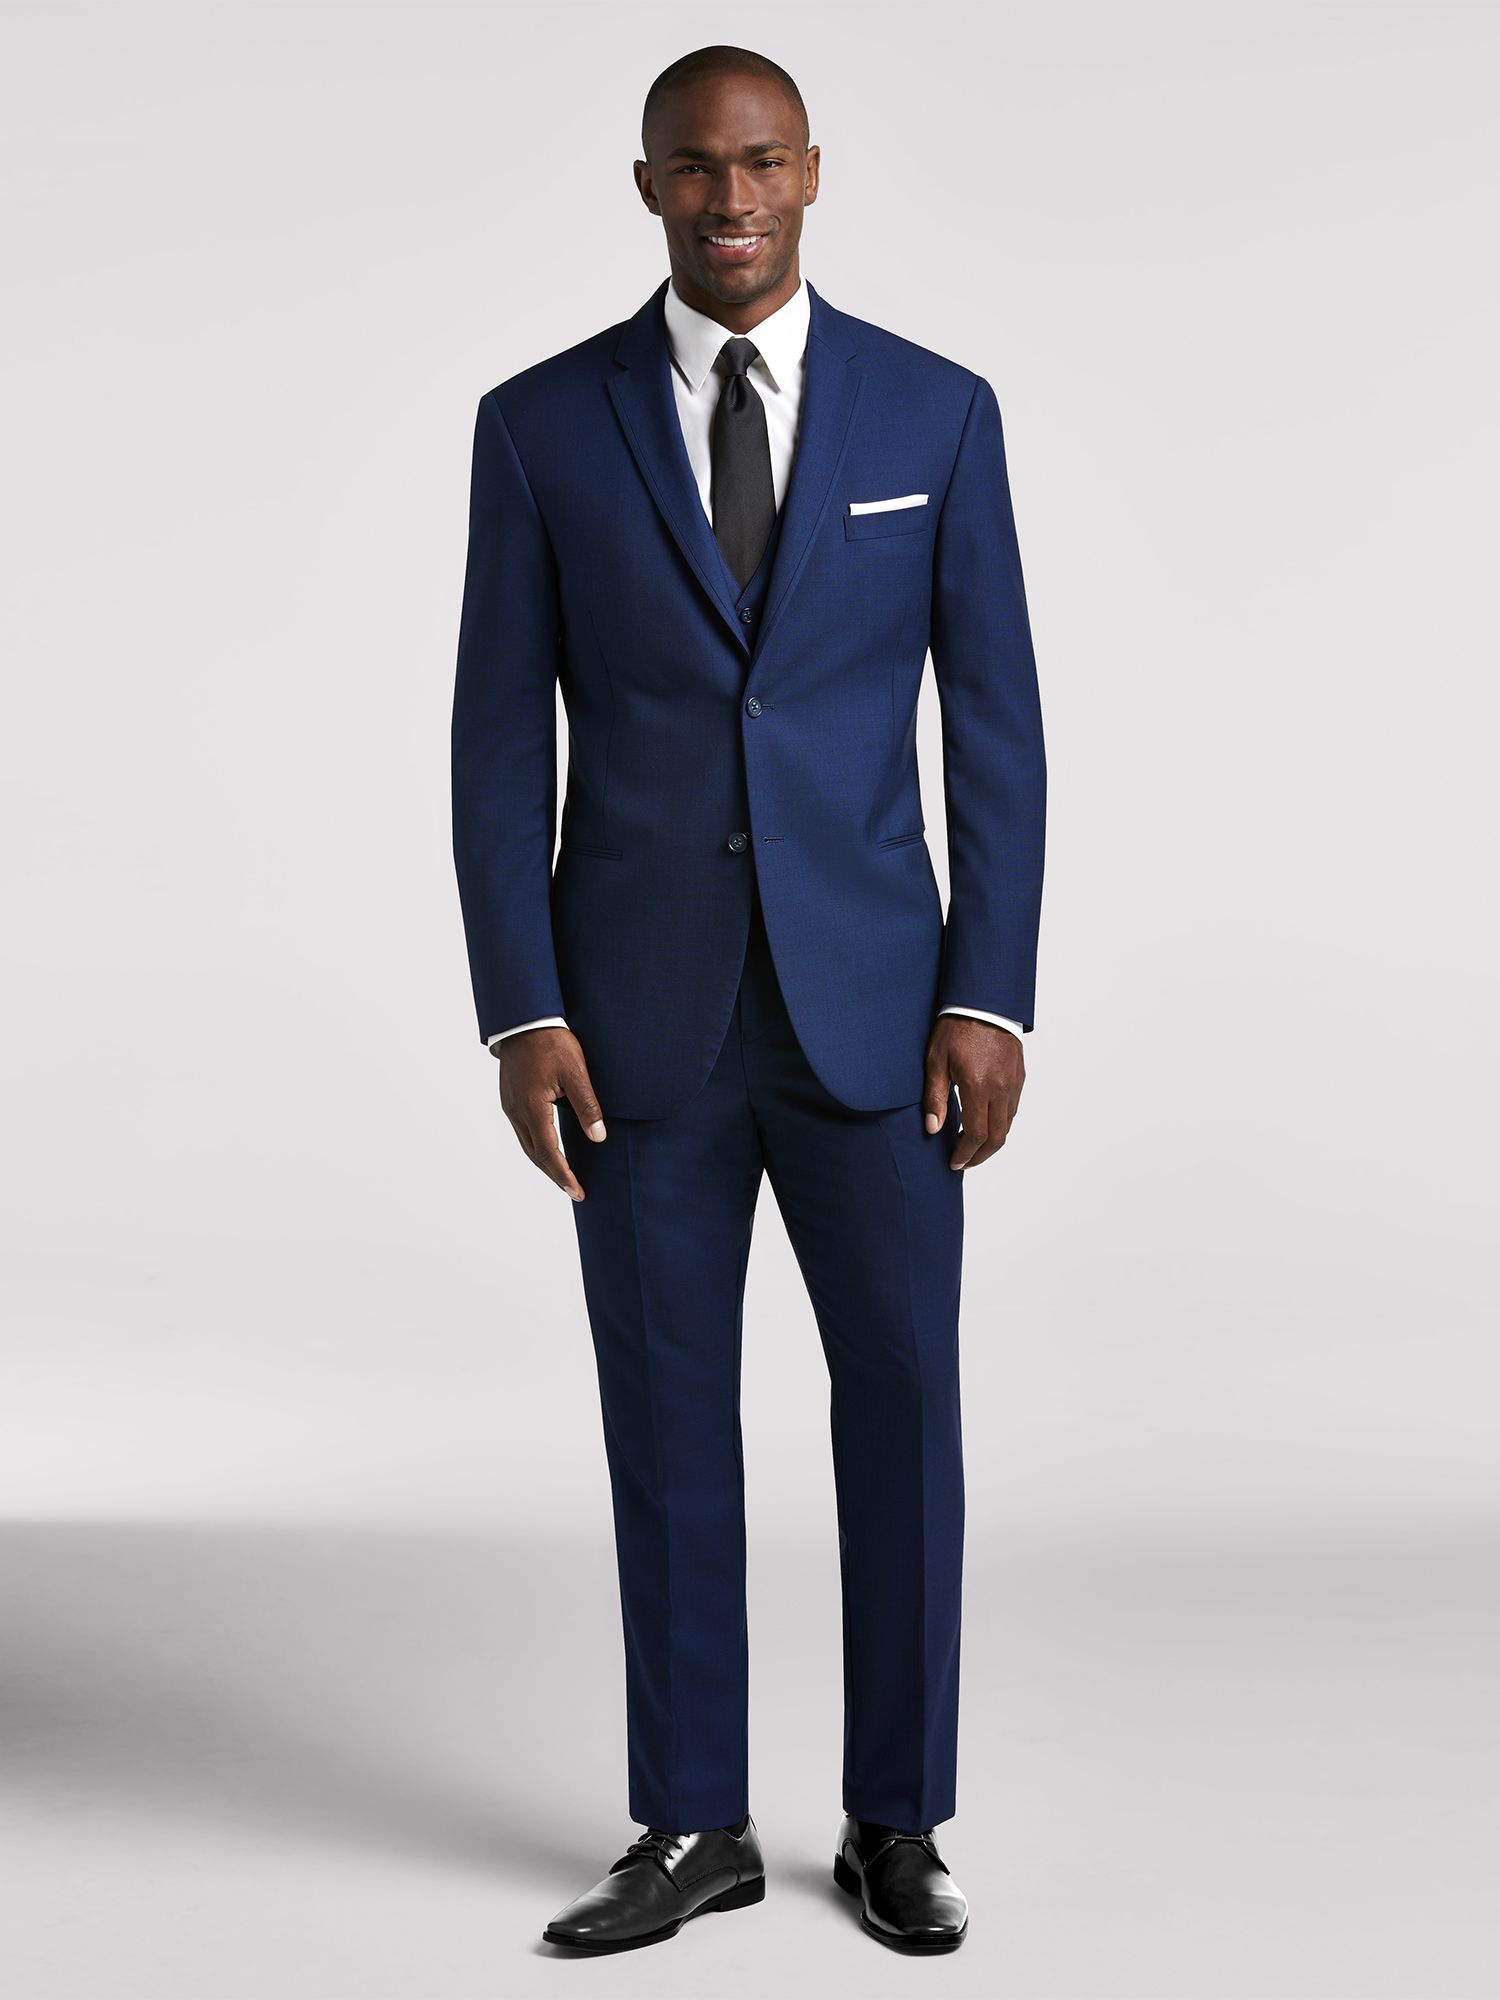 Pre-Styled Tuxedos for Special Occasions & Formal Events | Men's Wearhouse